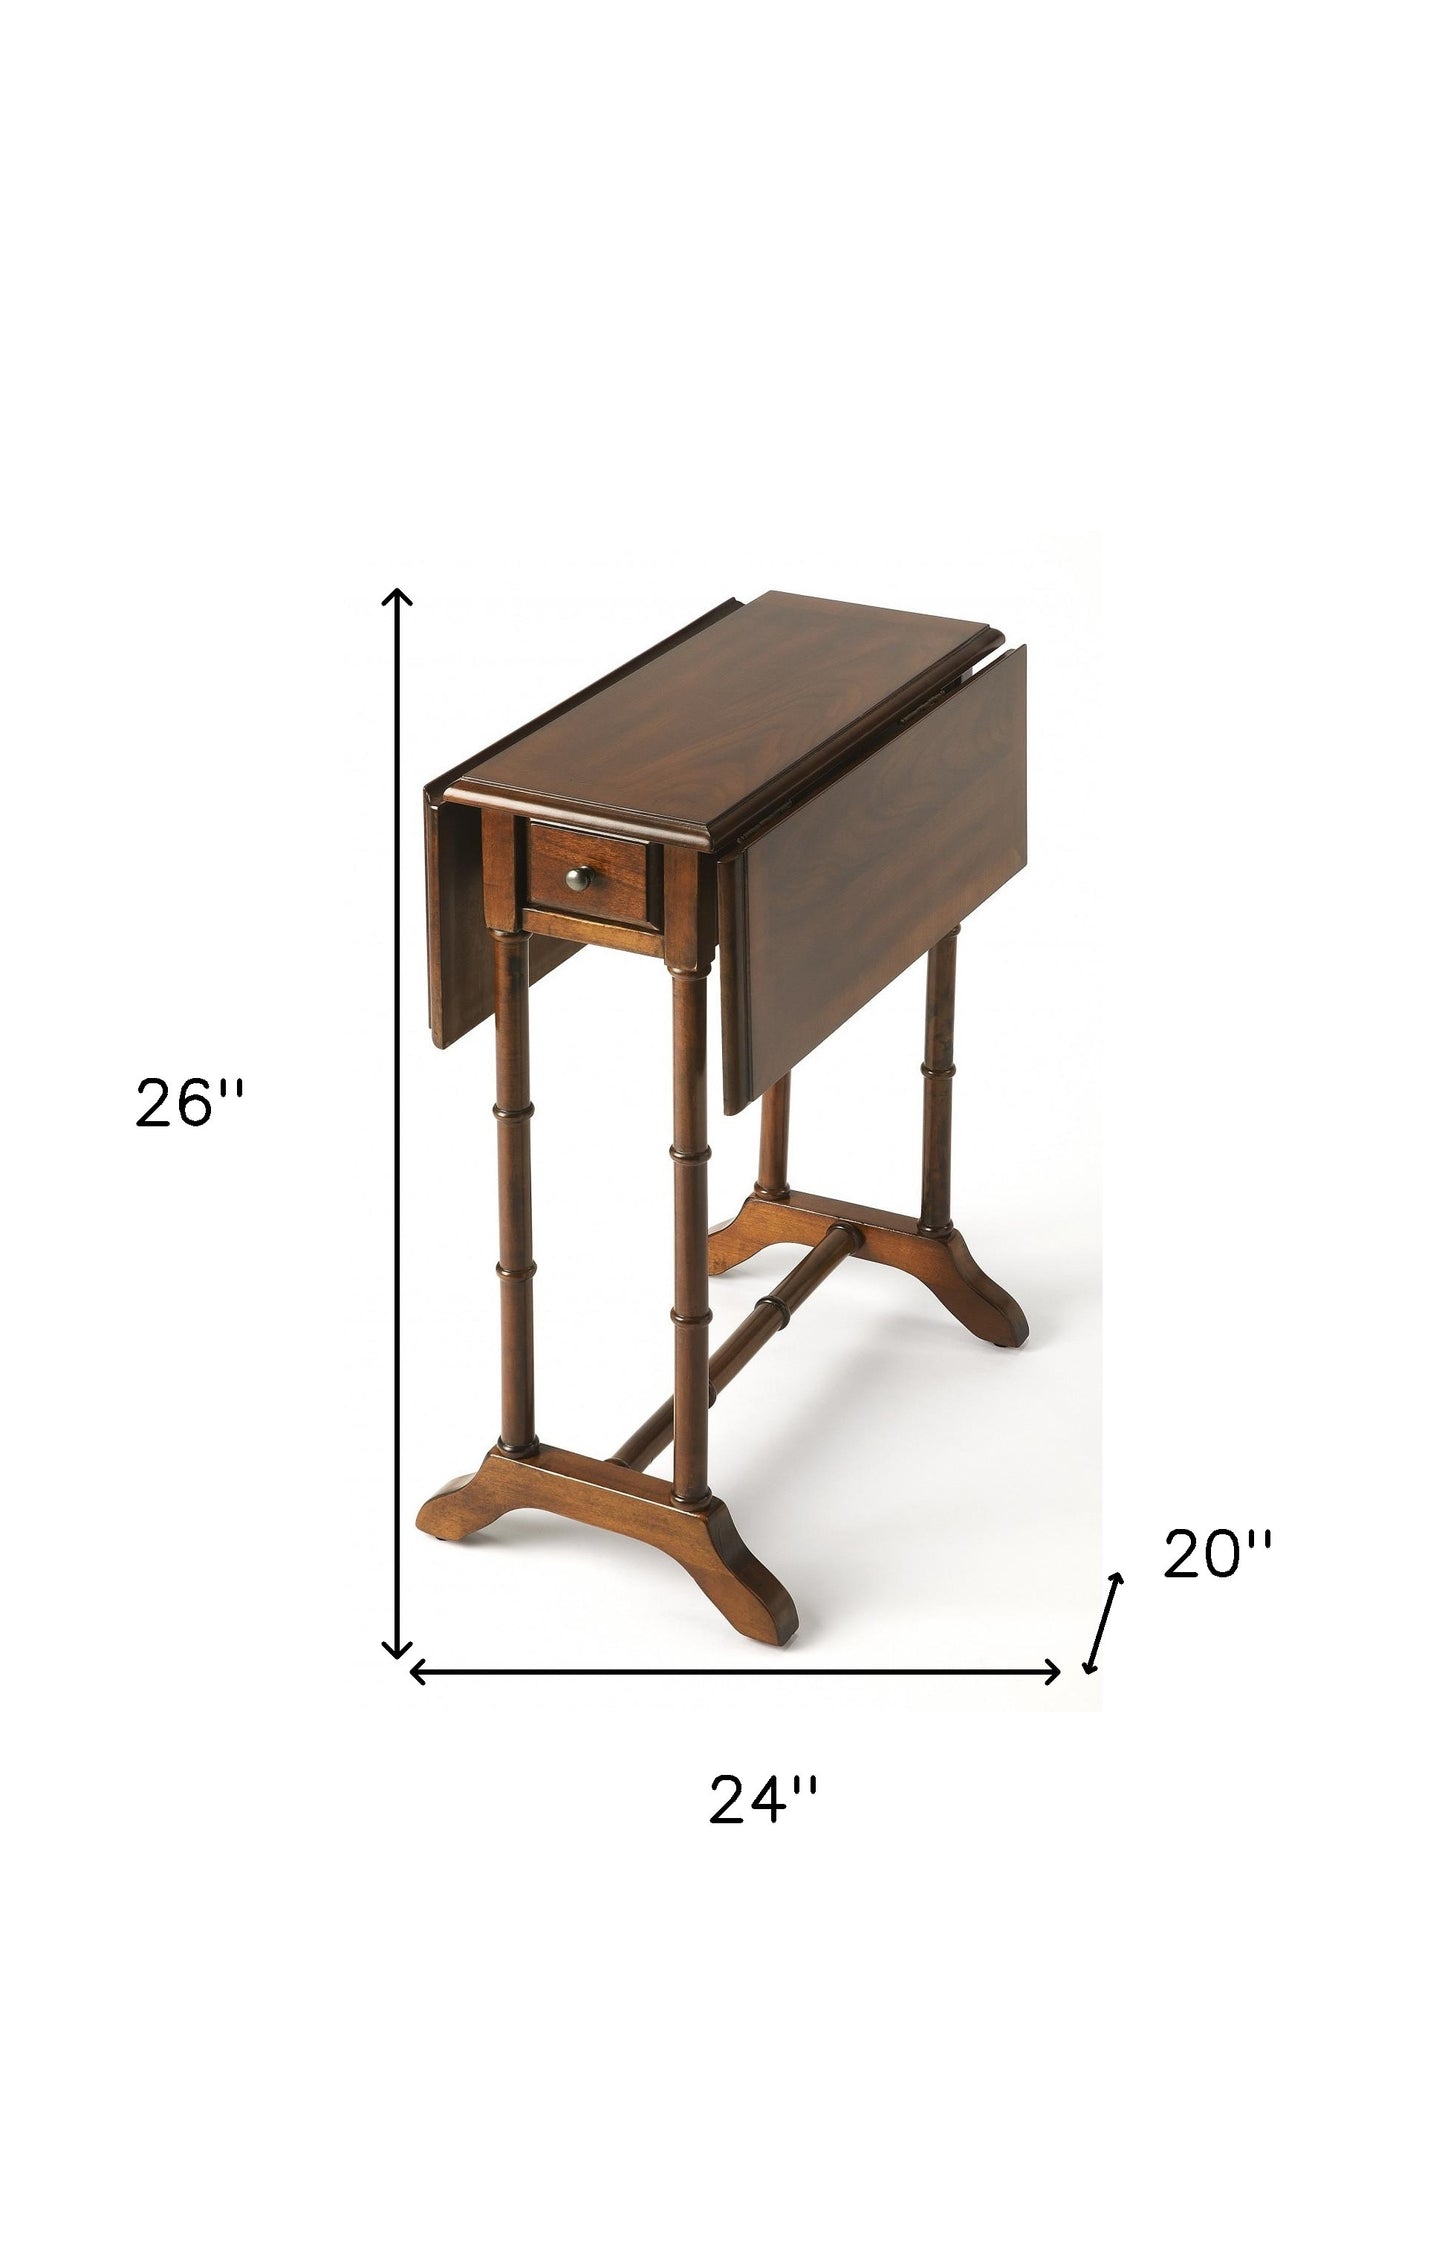 26" Medium Brown Solid And Manufactured Wood Rectangular End Table With Drawer By Homeroots